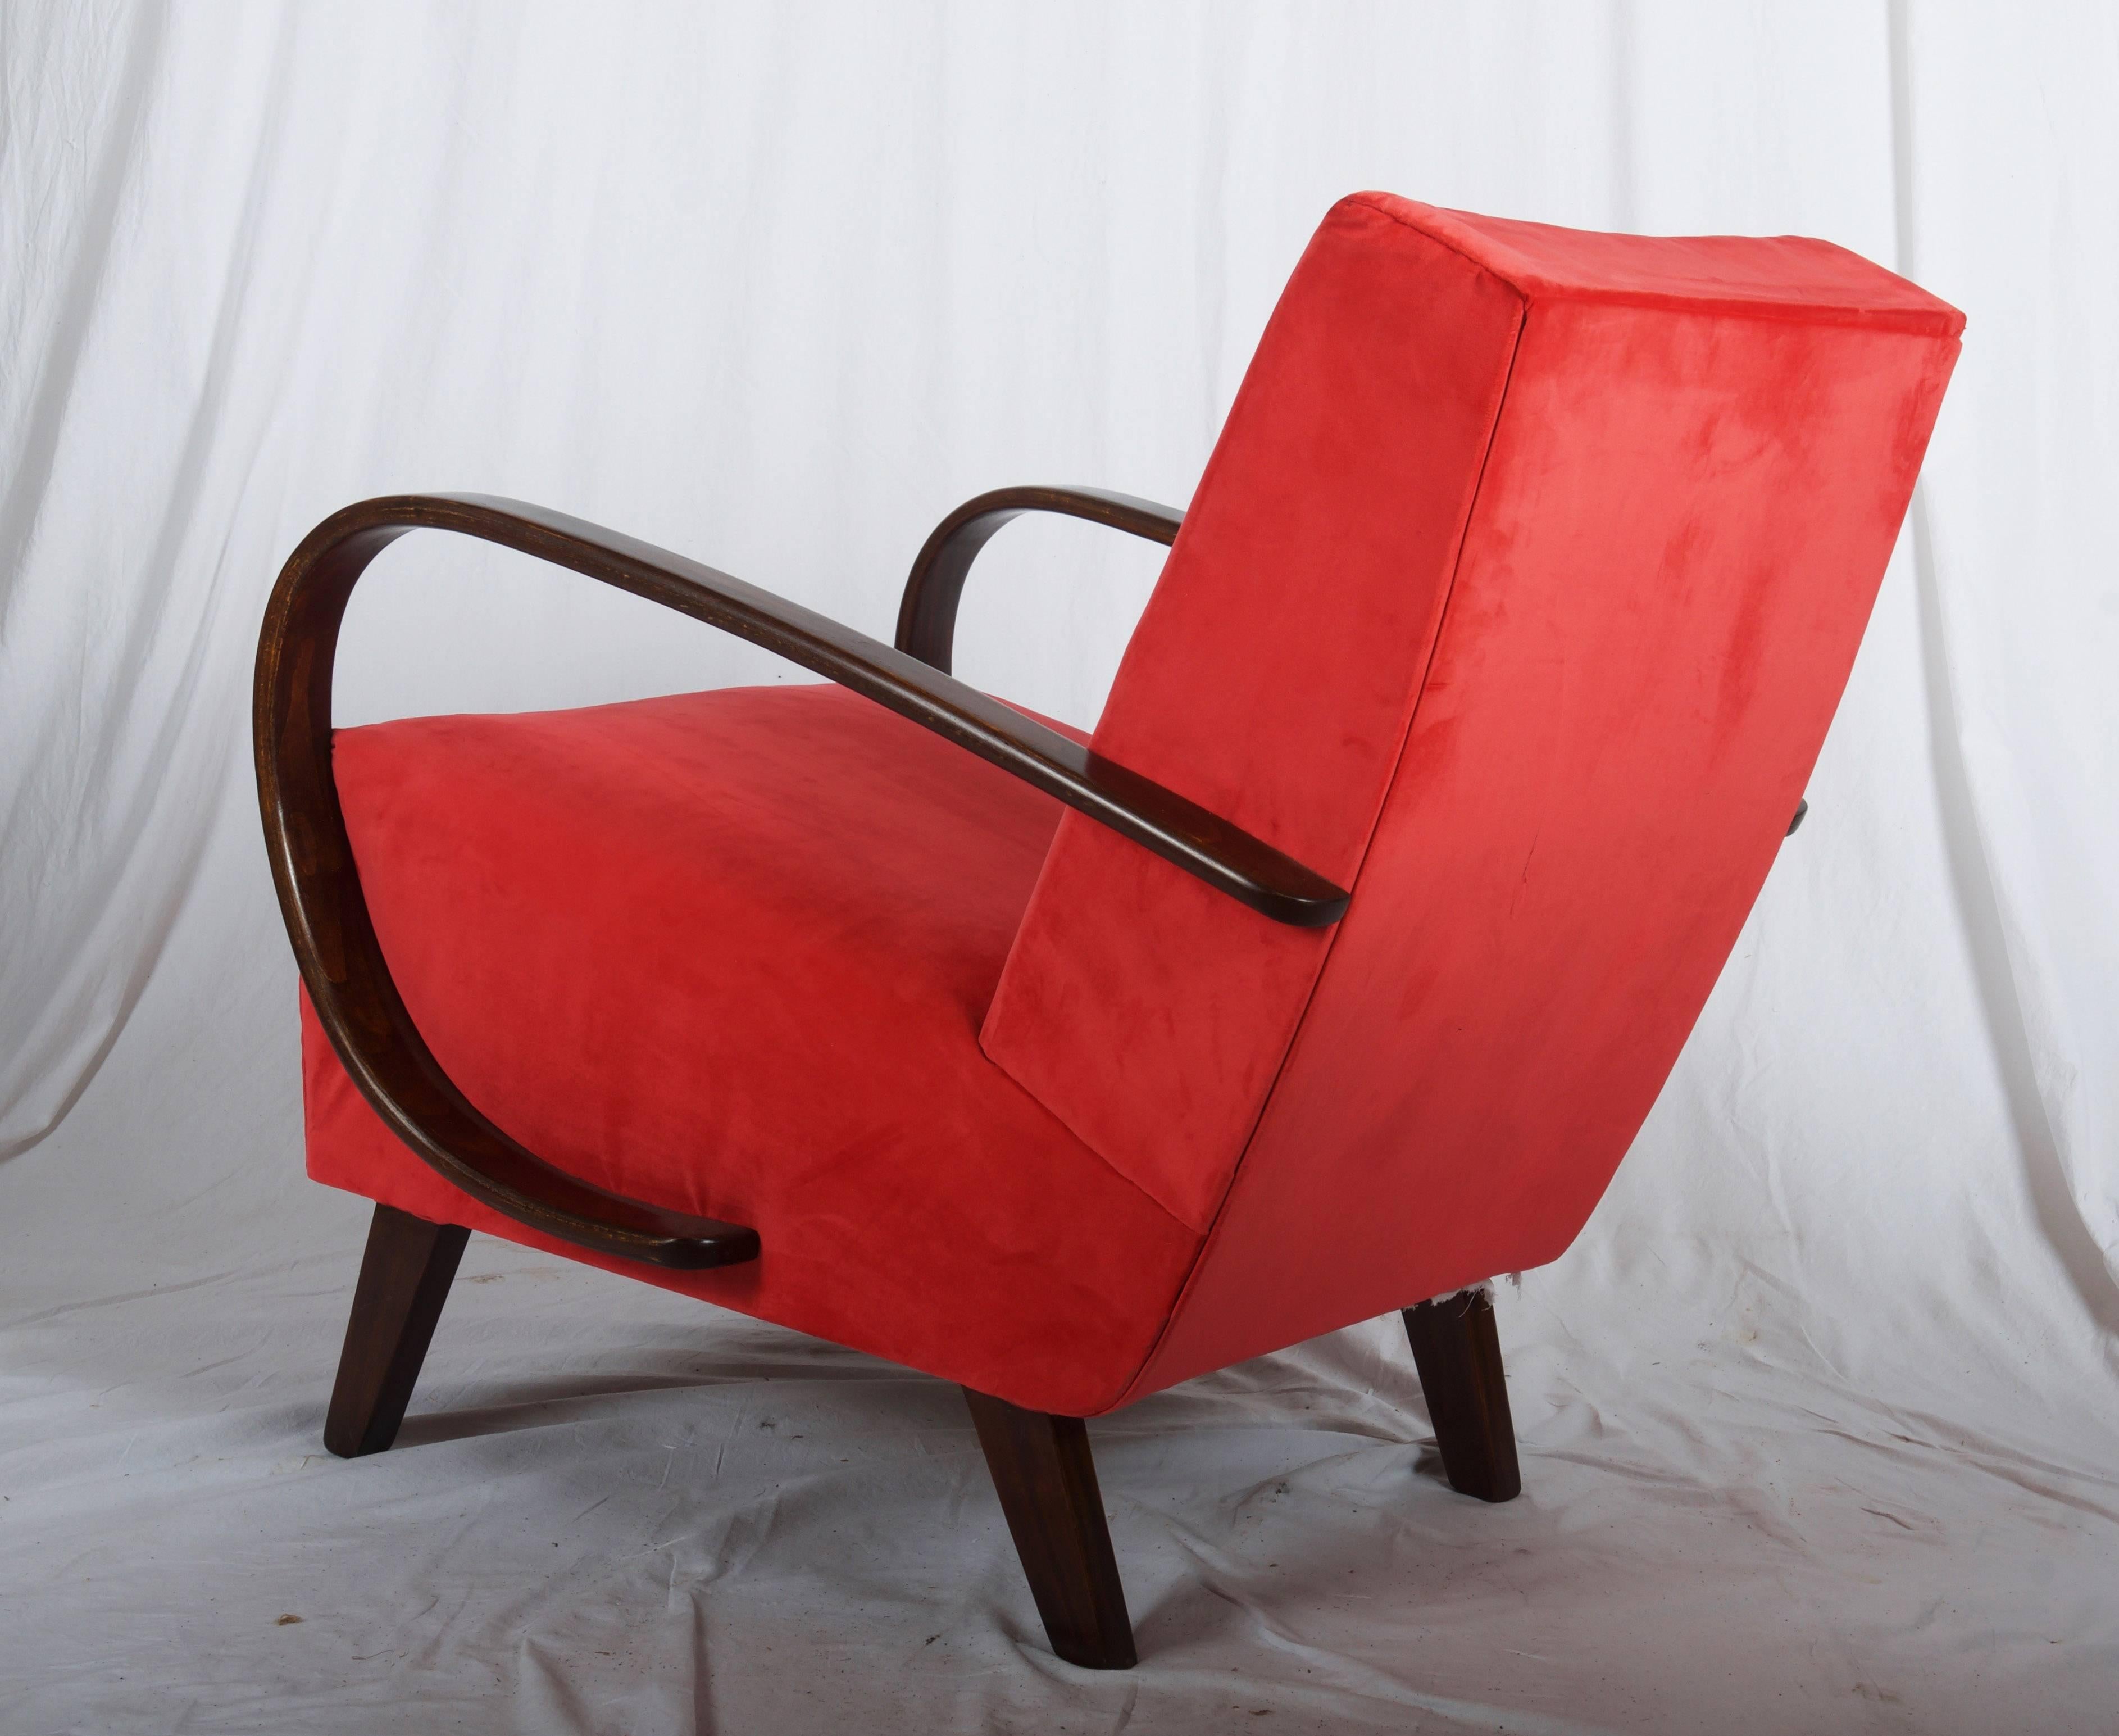 Armchairs designed in the late 1950s by Jindrich Halabala, fully restored and upholstered with Lelieve red velvet.
Only one restored, delivery time 3-4 weeks.
   